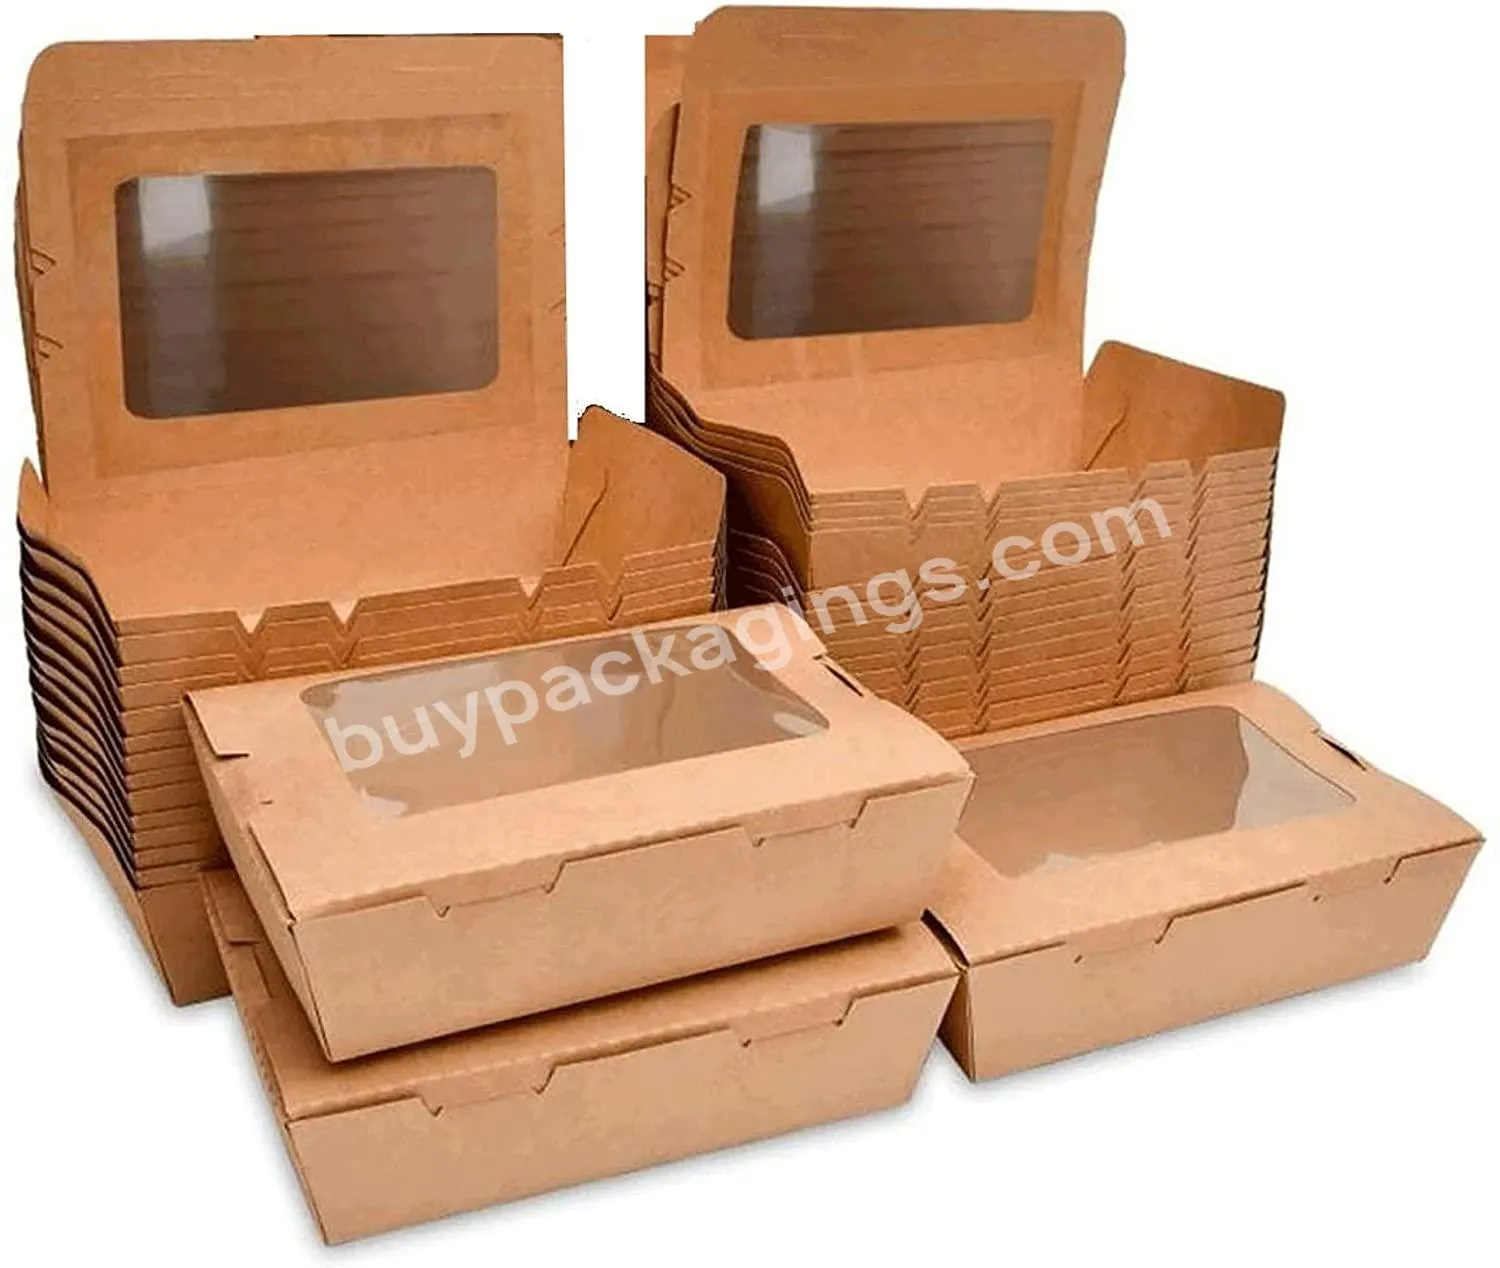 Take Out Disposable Food Containers,Kraft Brown Food Boxes,With Individually Packaged Forks - Buy Takeaway Packaging Box,Disposable Boxes For Food,Disposable Food Containers.